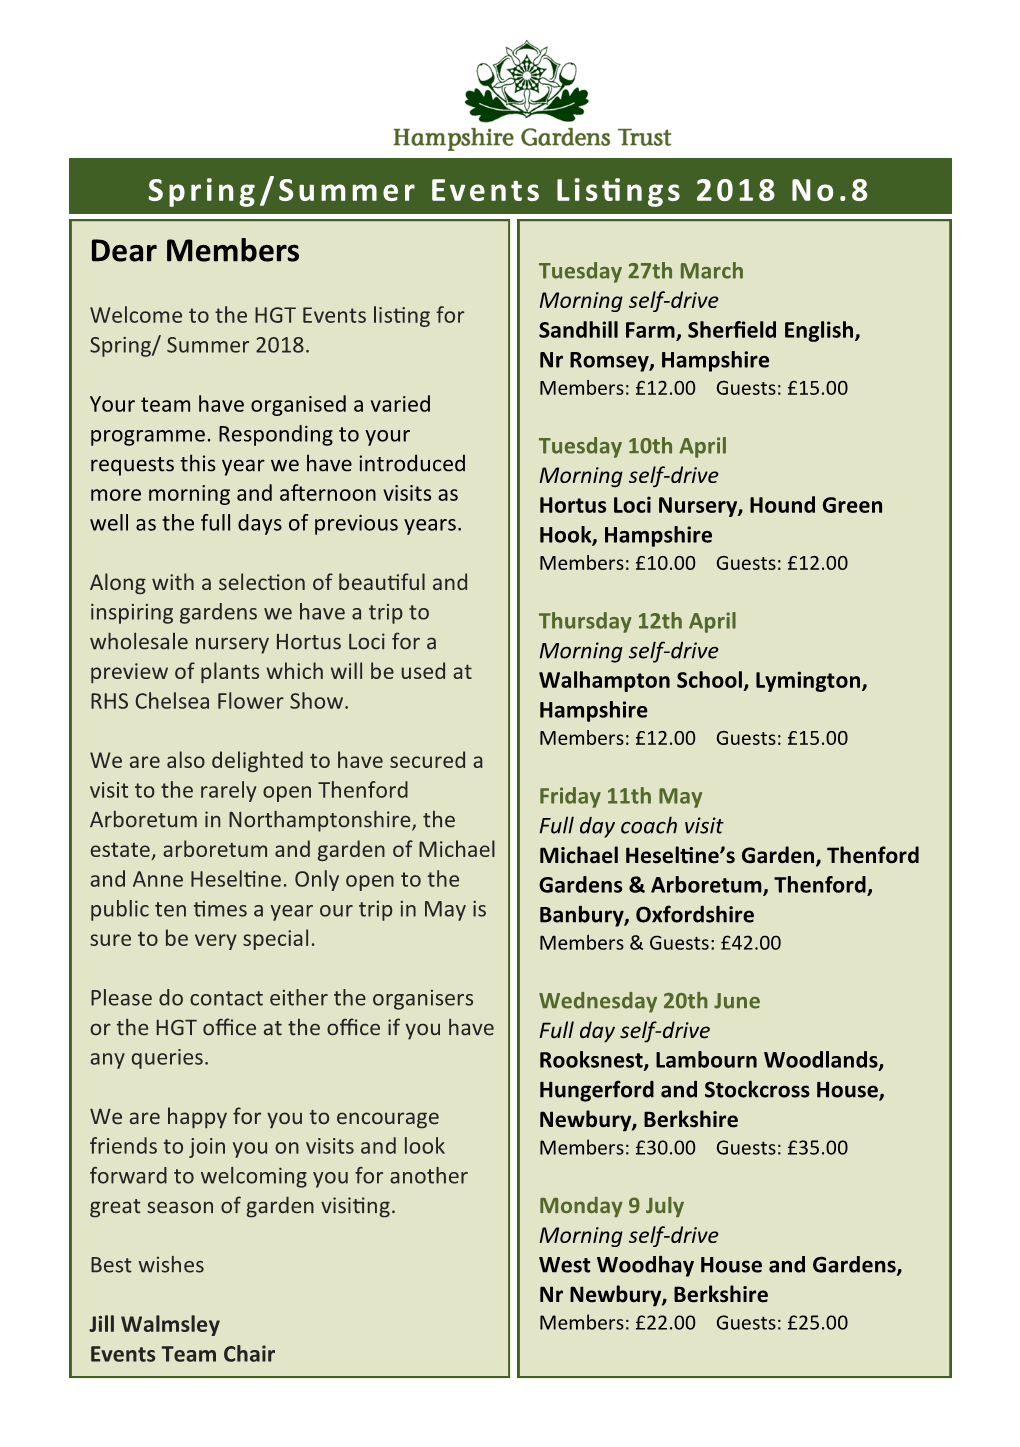 Dear Members Spring/Summer Events Listings 2018 No.8